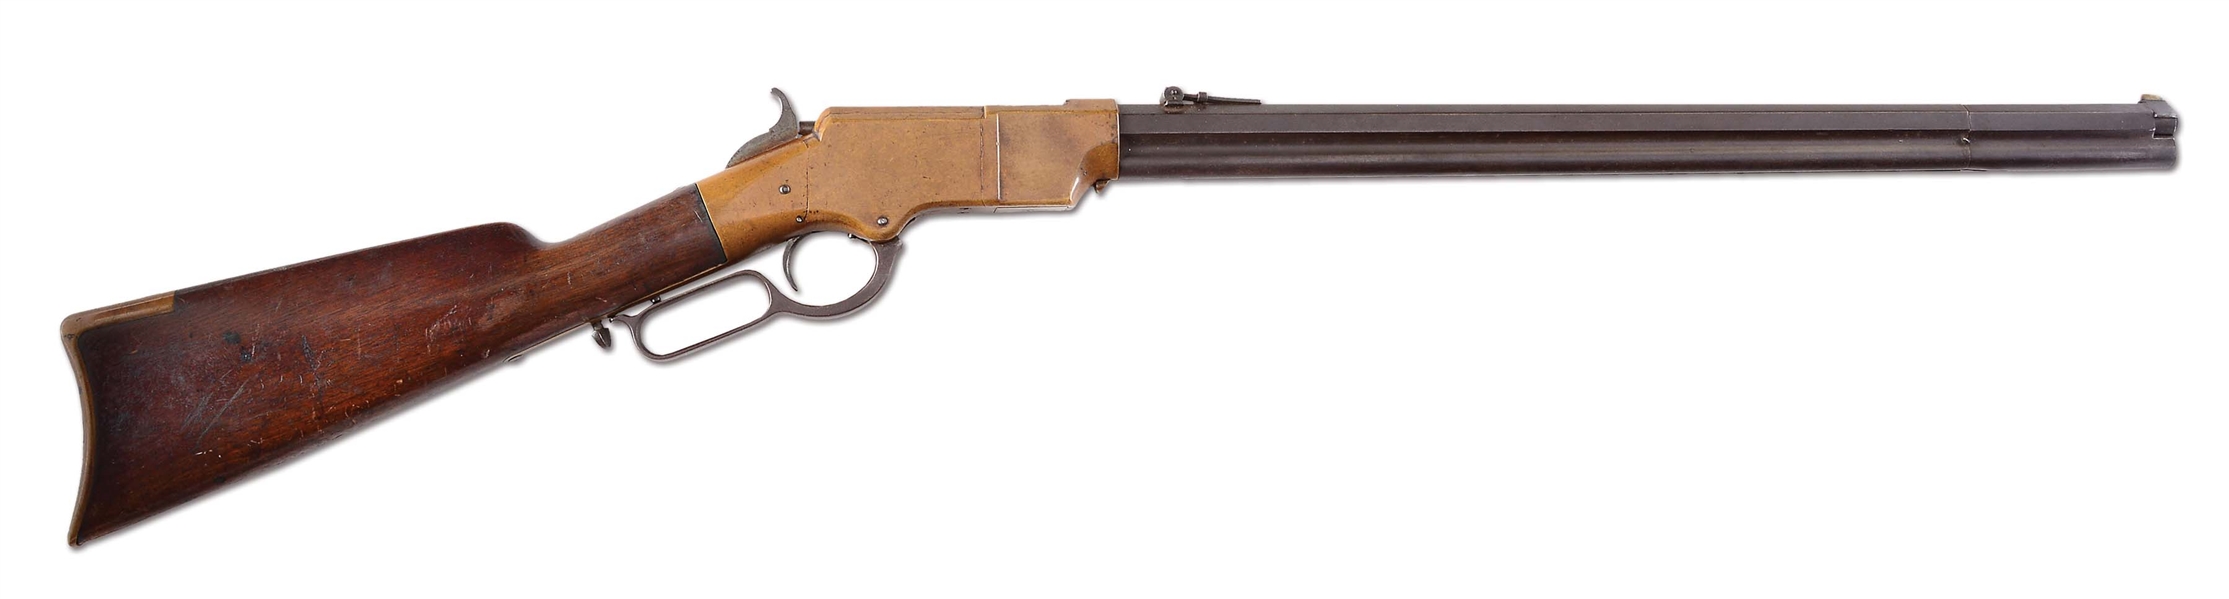 (A) HENRY MODEL 1860 LEVER ACTION RIFLE, MARKED "W. F. GILBERT 1870".